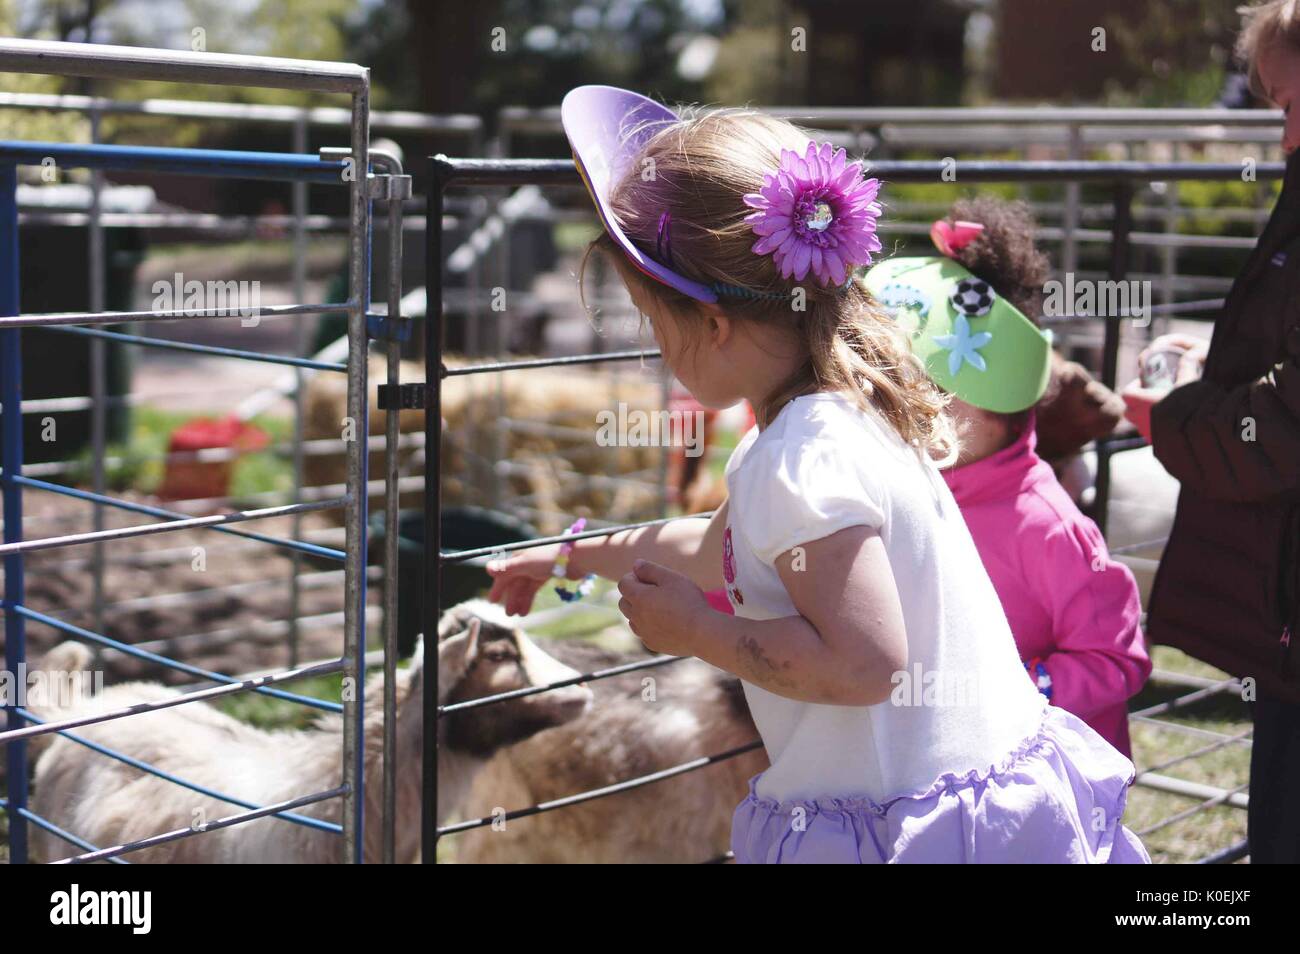 Families with young children visit a petting zoo, which has been set up for Spring Fair, an annual festival with music, food, shopping, and more that takes place every spring on the Homewood campus of the Johns Hopkins University in Baltimore, Maryland. 2014. Courtesy Eric Chen. Stock Photo